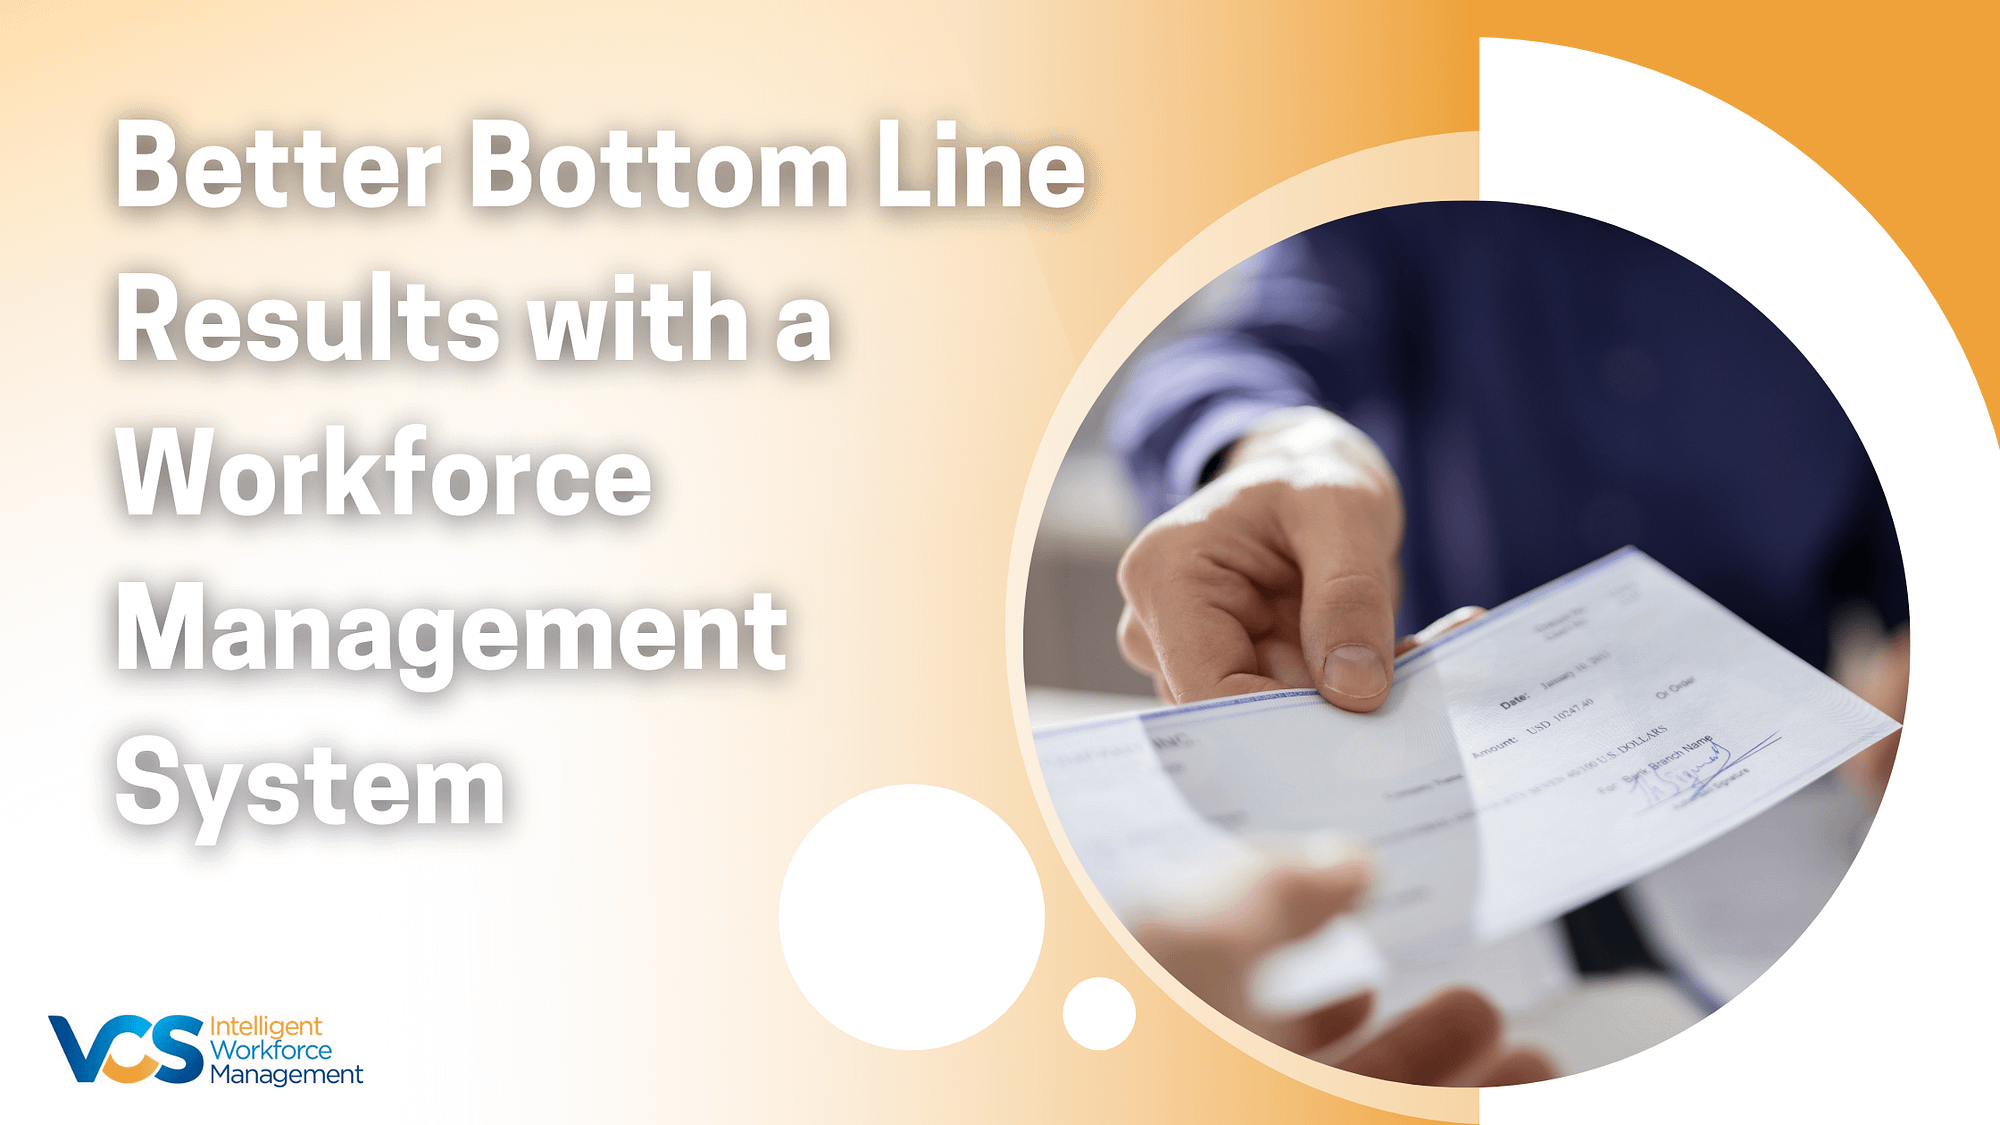 Better Bottom Line Results with a Workforce Management System